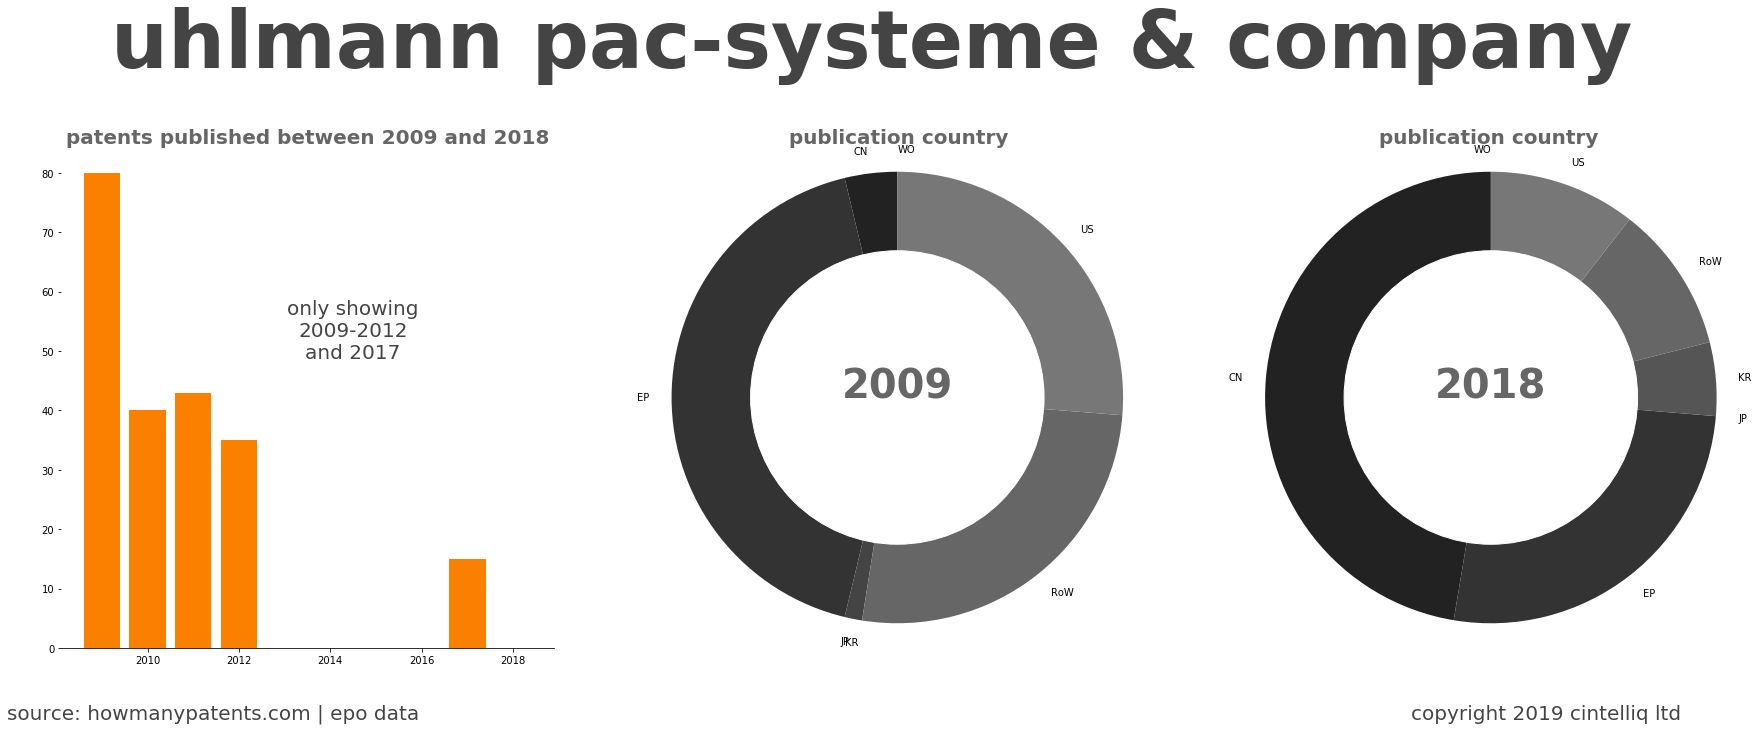 summary of patents for Uhlmann Pac-Systeme & Company